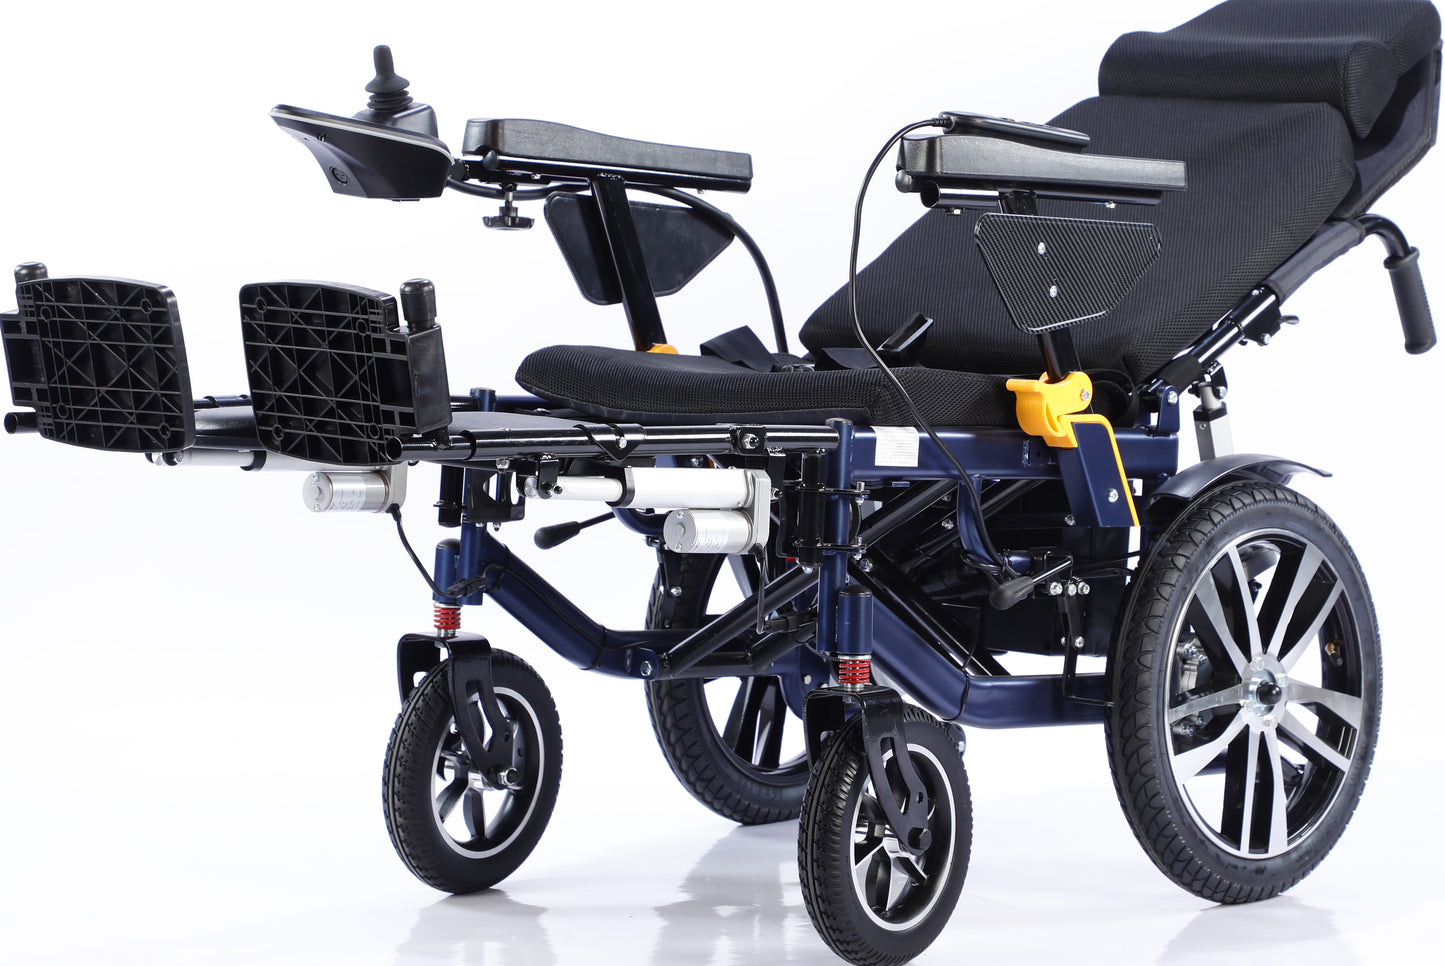 Dr.Ortho electric wheelchair DR-N-40-D with automatic lifting  footrest and Recling Backrest